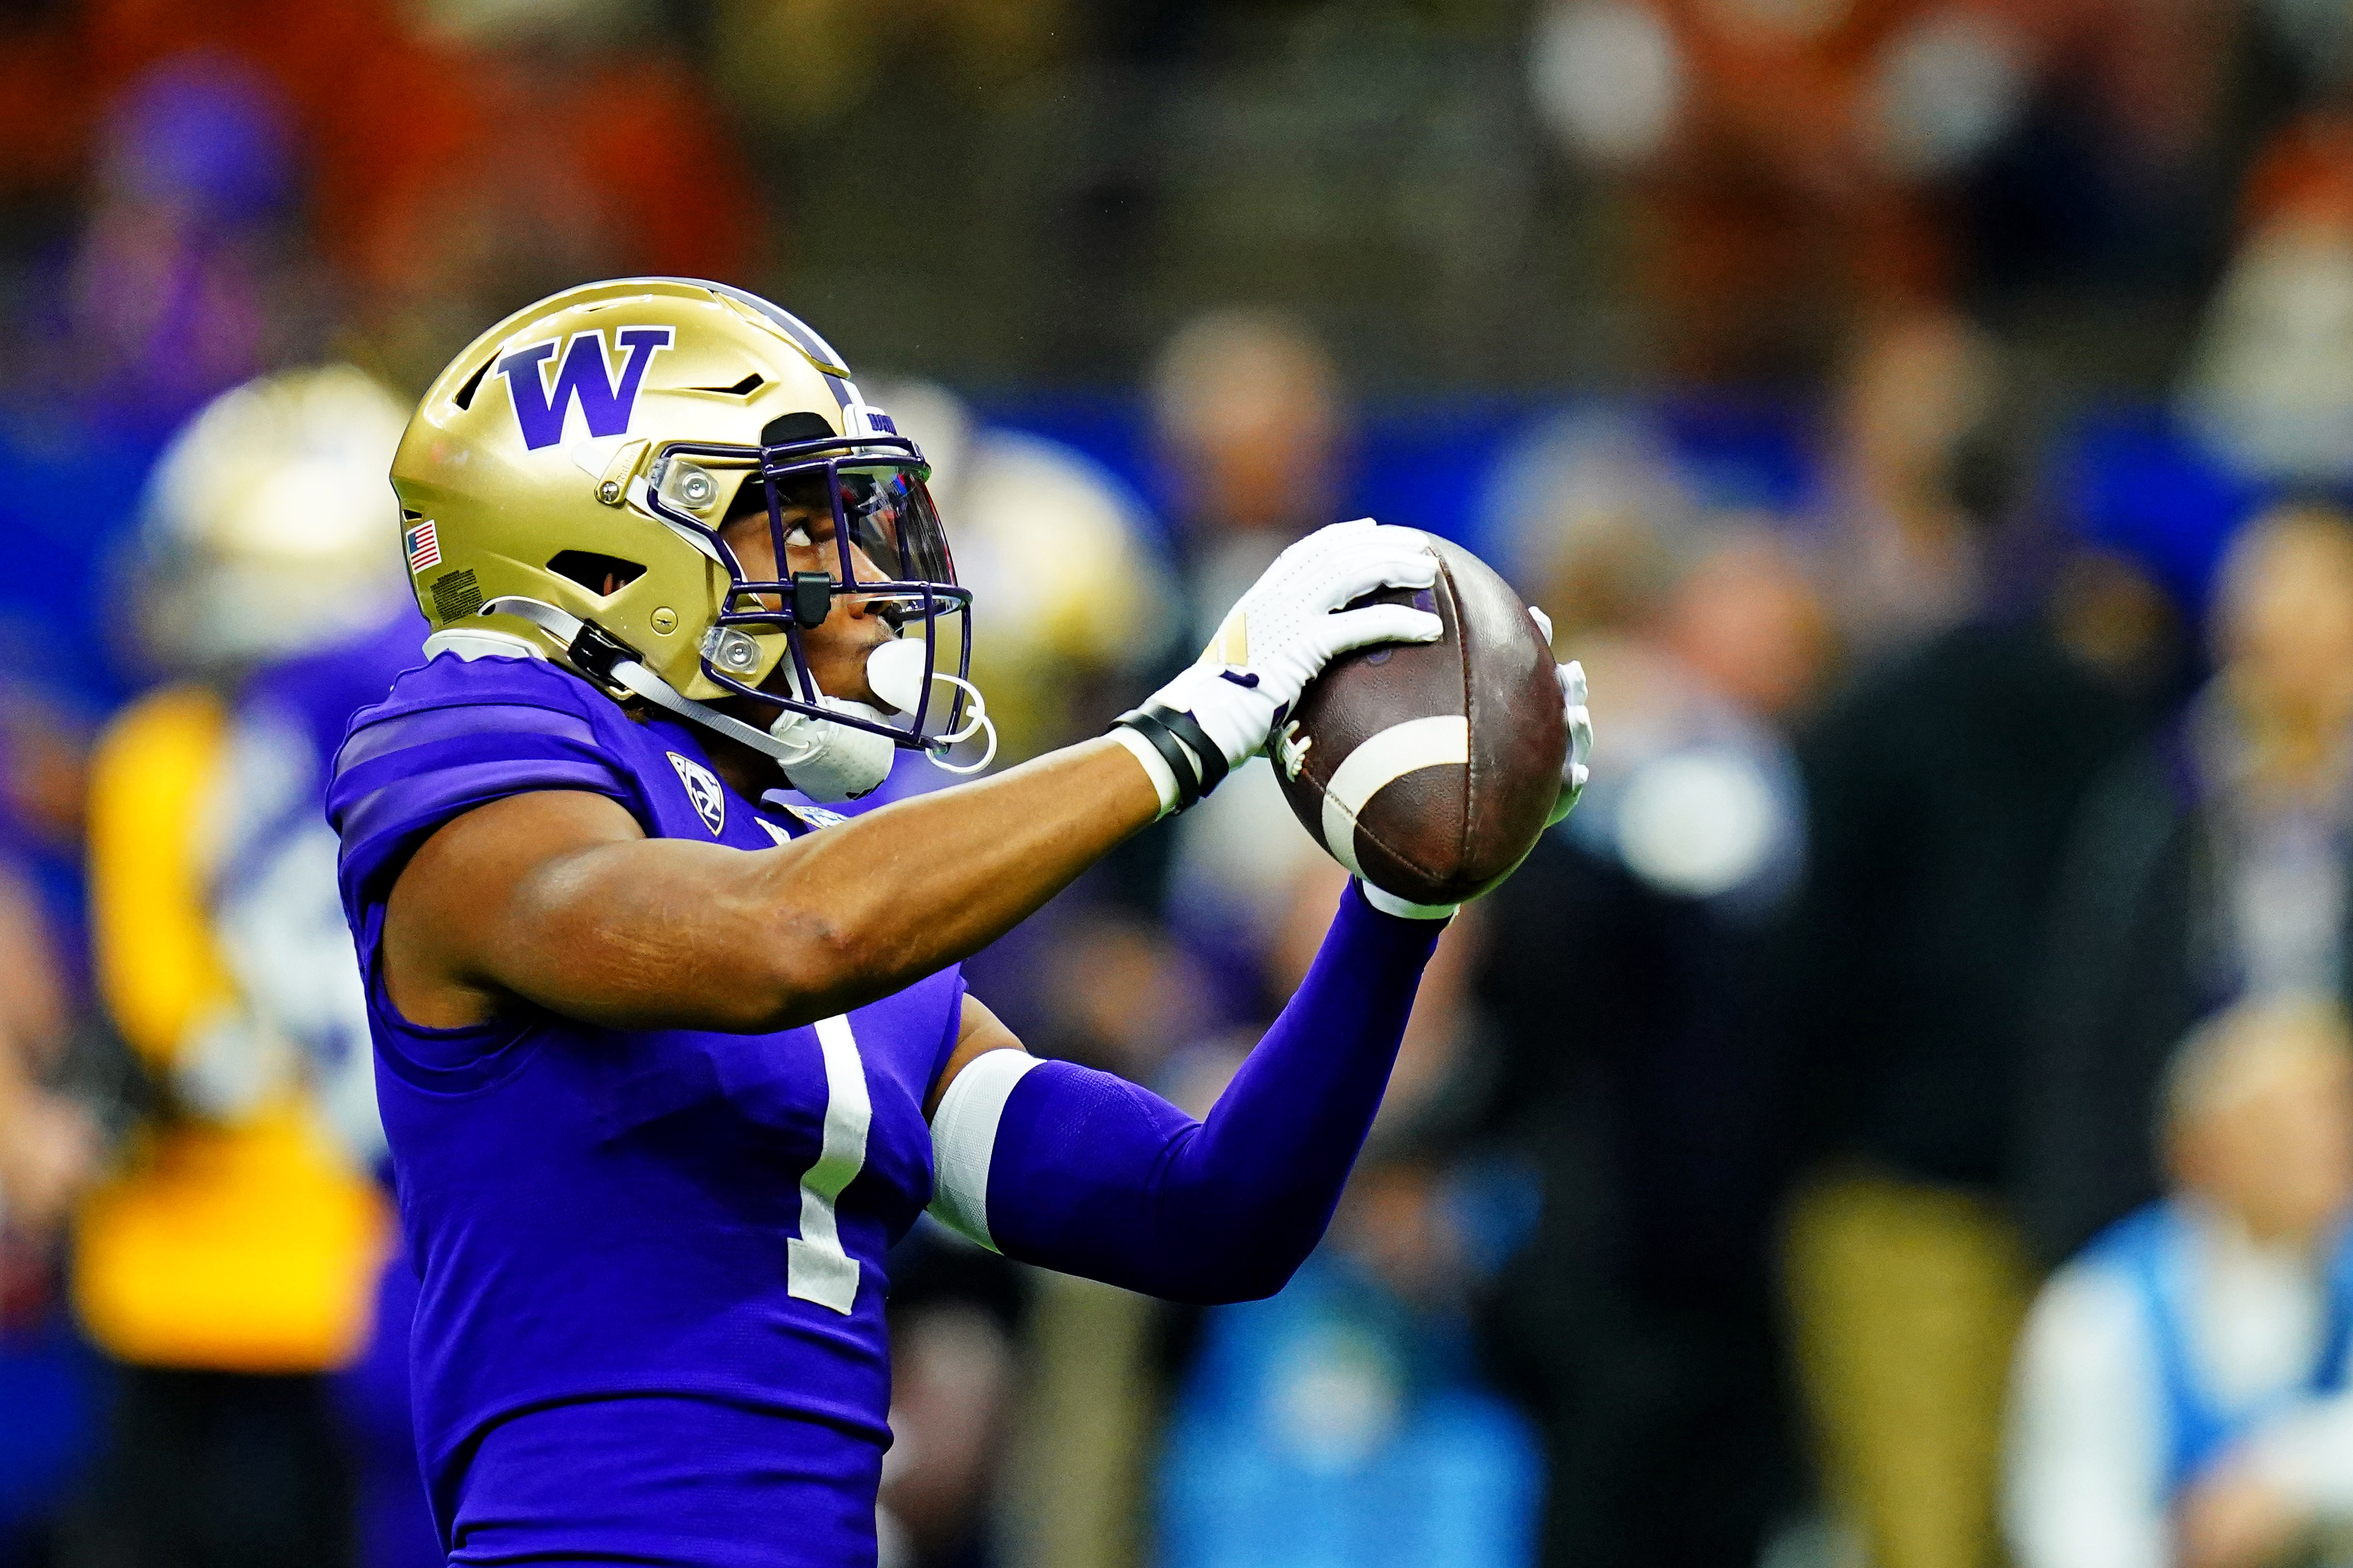 Jan 1, 2024; New Orleans, LA, USA; Washington Huskies wide receiver Rome Odunze (1) warms up before playing against the Texas Longhorns in the 2024 Sugar Bowl college football playoff semifinal game at Caesars Superdome. Mandatory Credit: John David Mercer-USA TODAY Sports